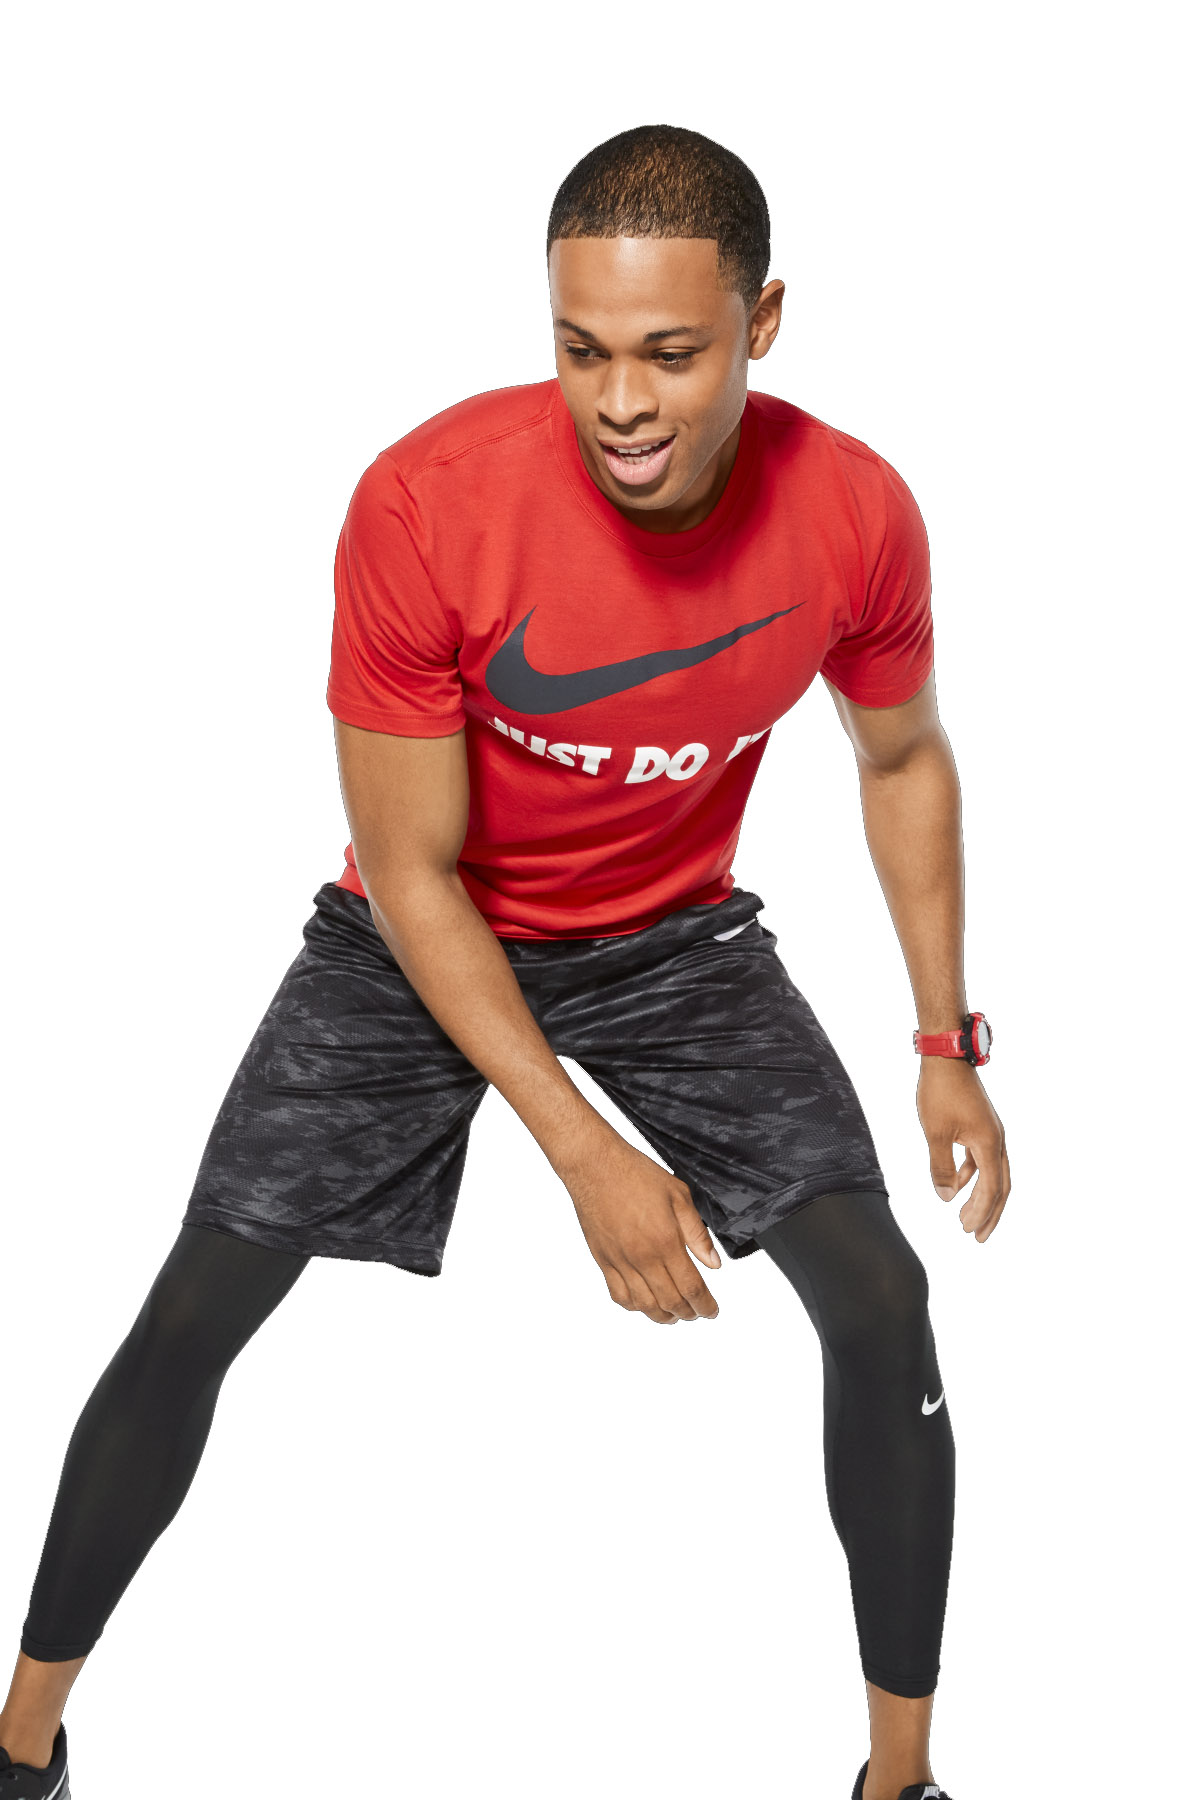 Jcpenney Expands Active And Fitness Categories In 2018 Penney Ip Llc [ 1800 x 1200 Pixel ]